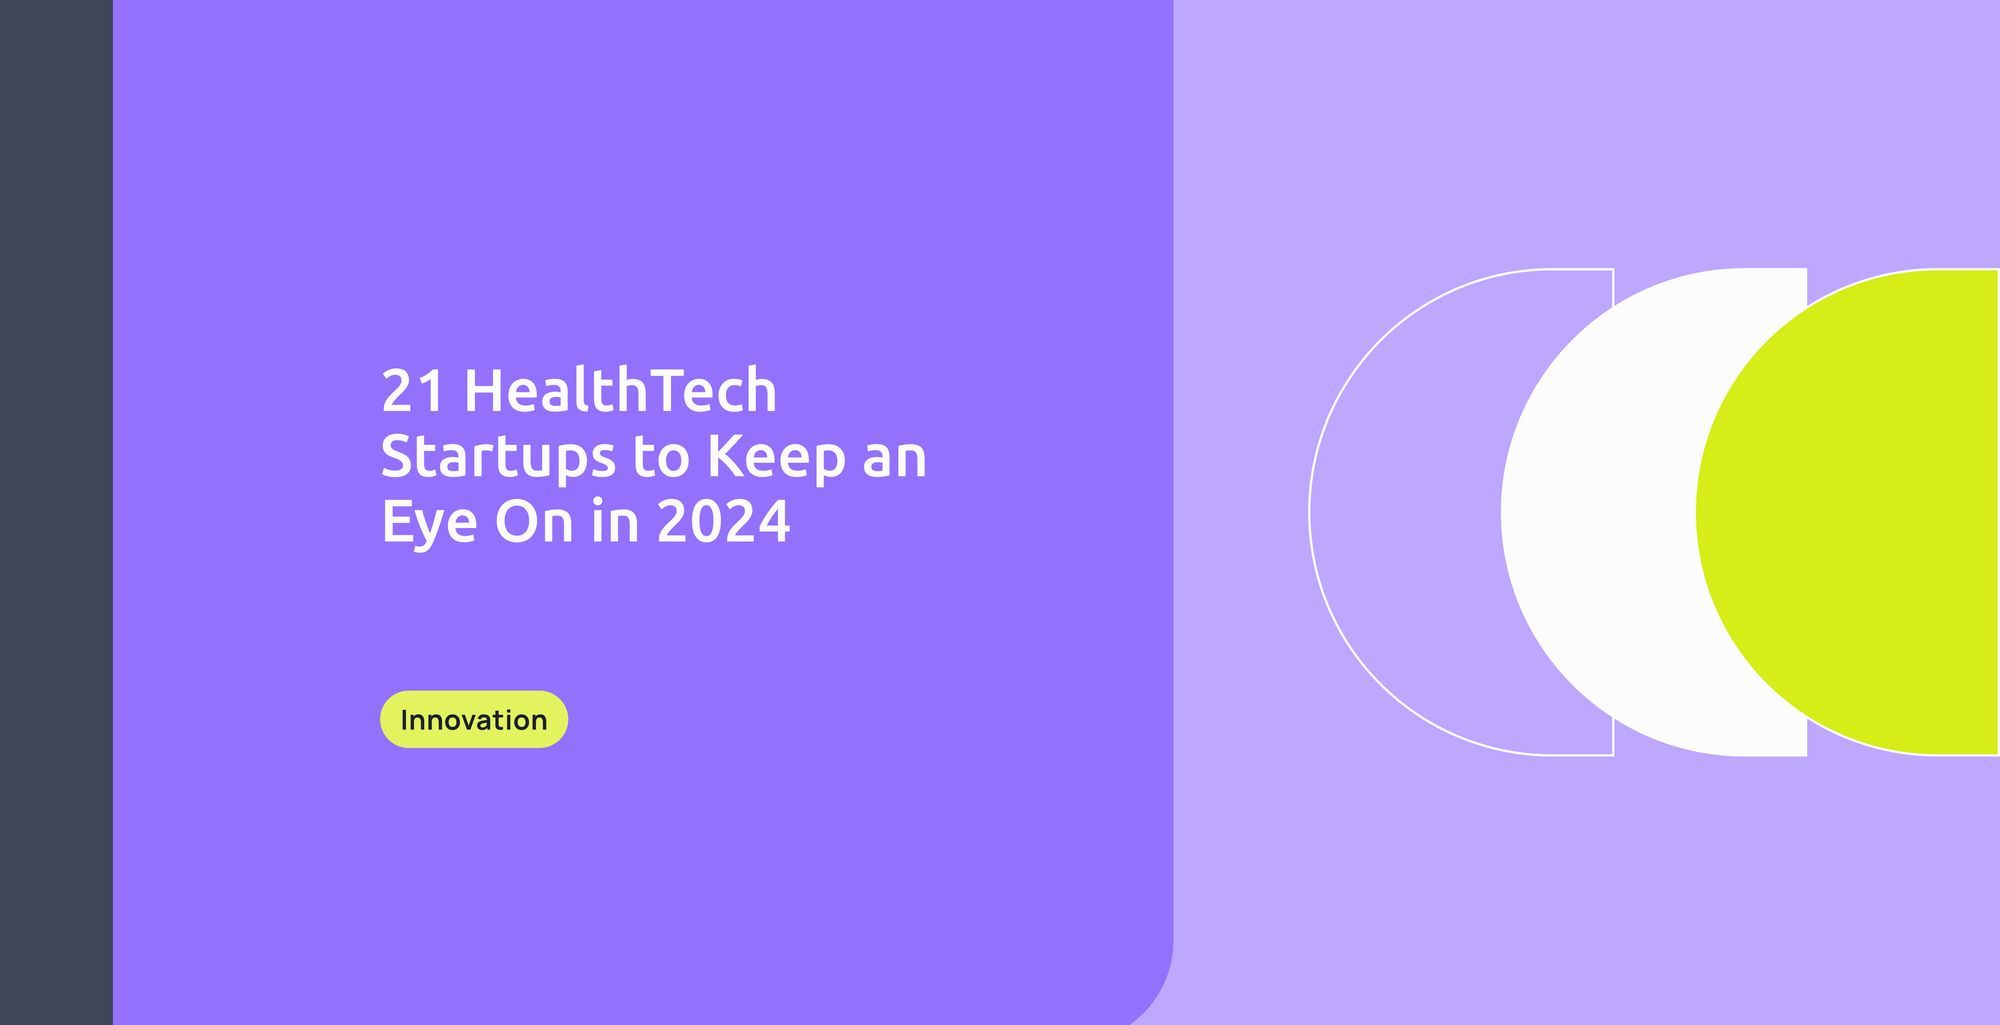 21 HealthTech Startups to Keep an Eye On in 2024